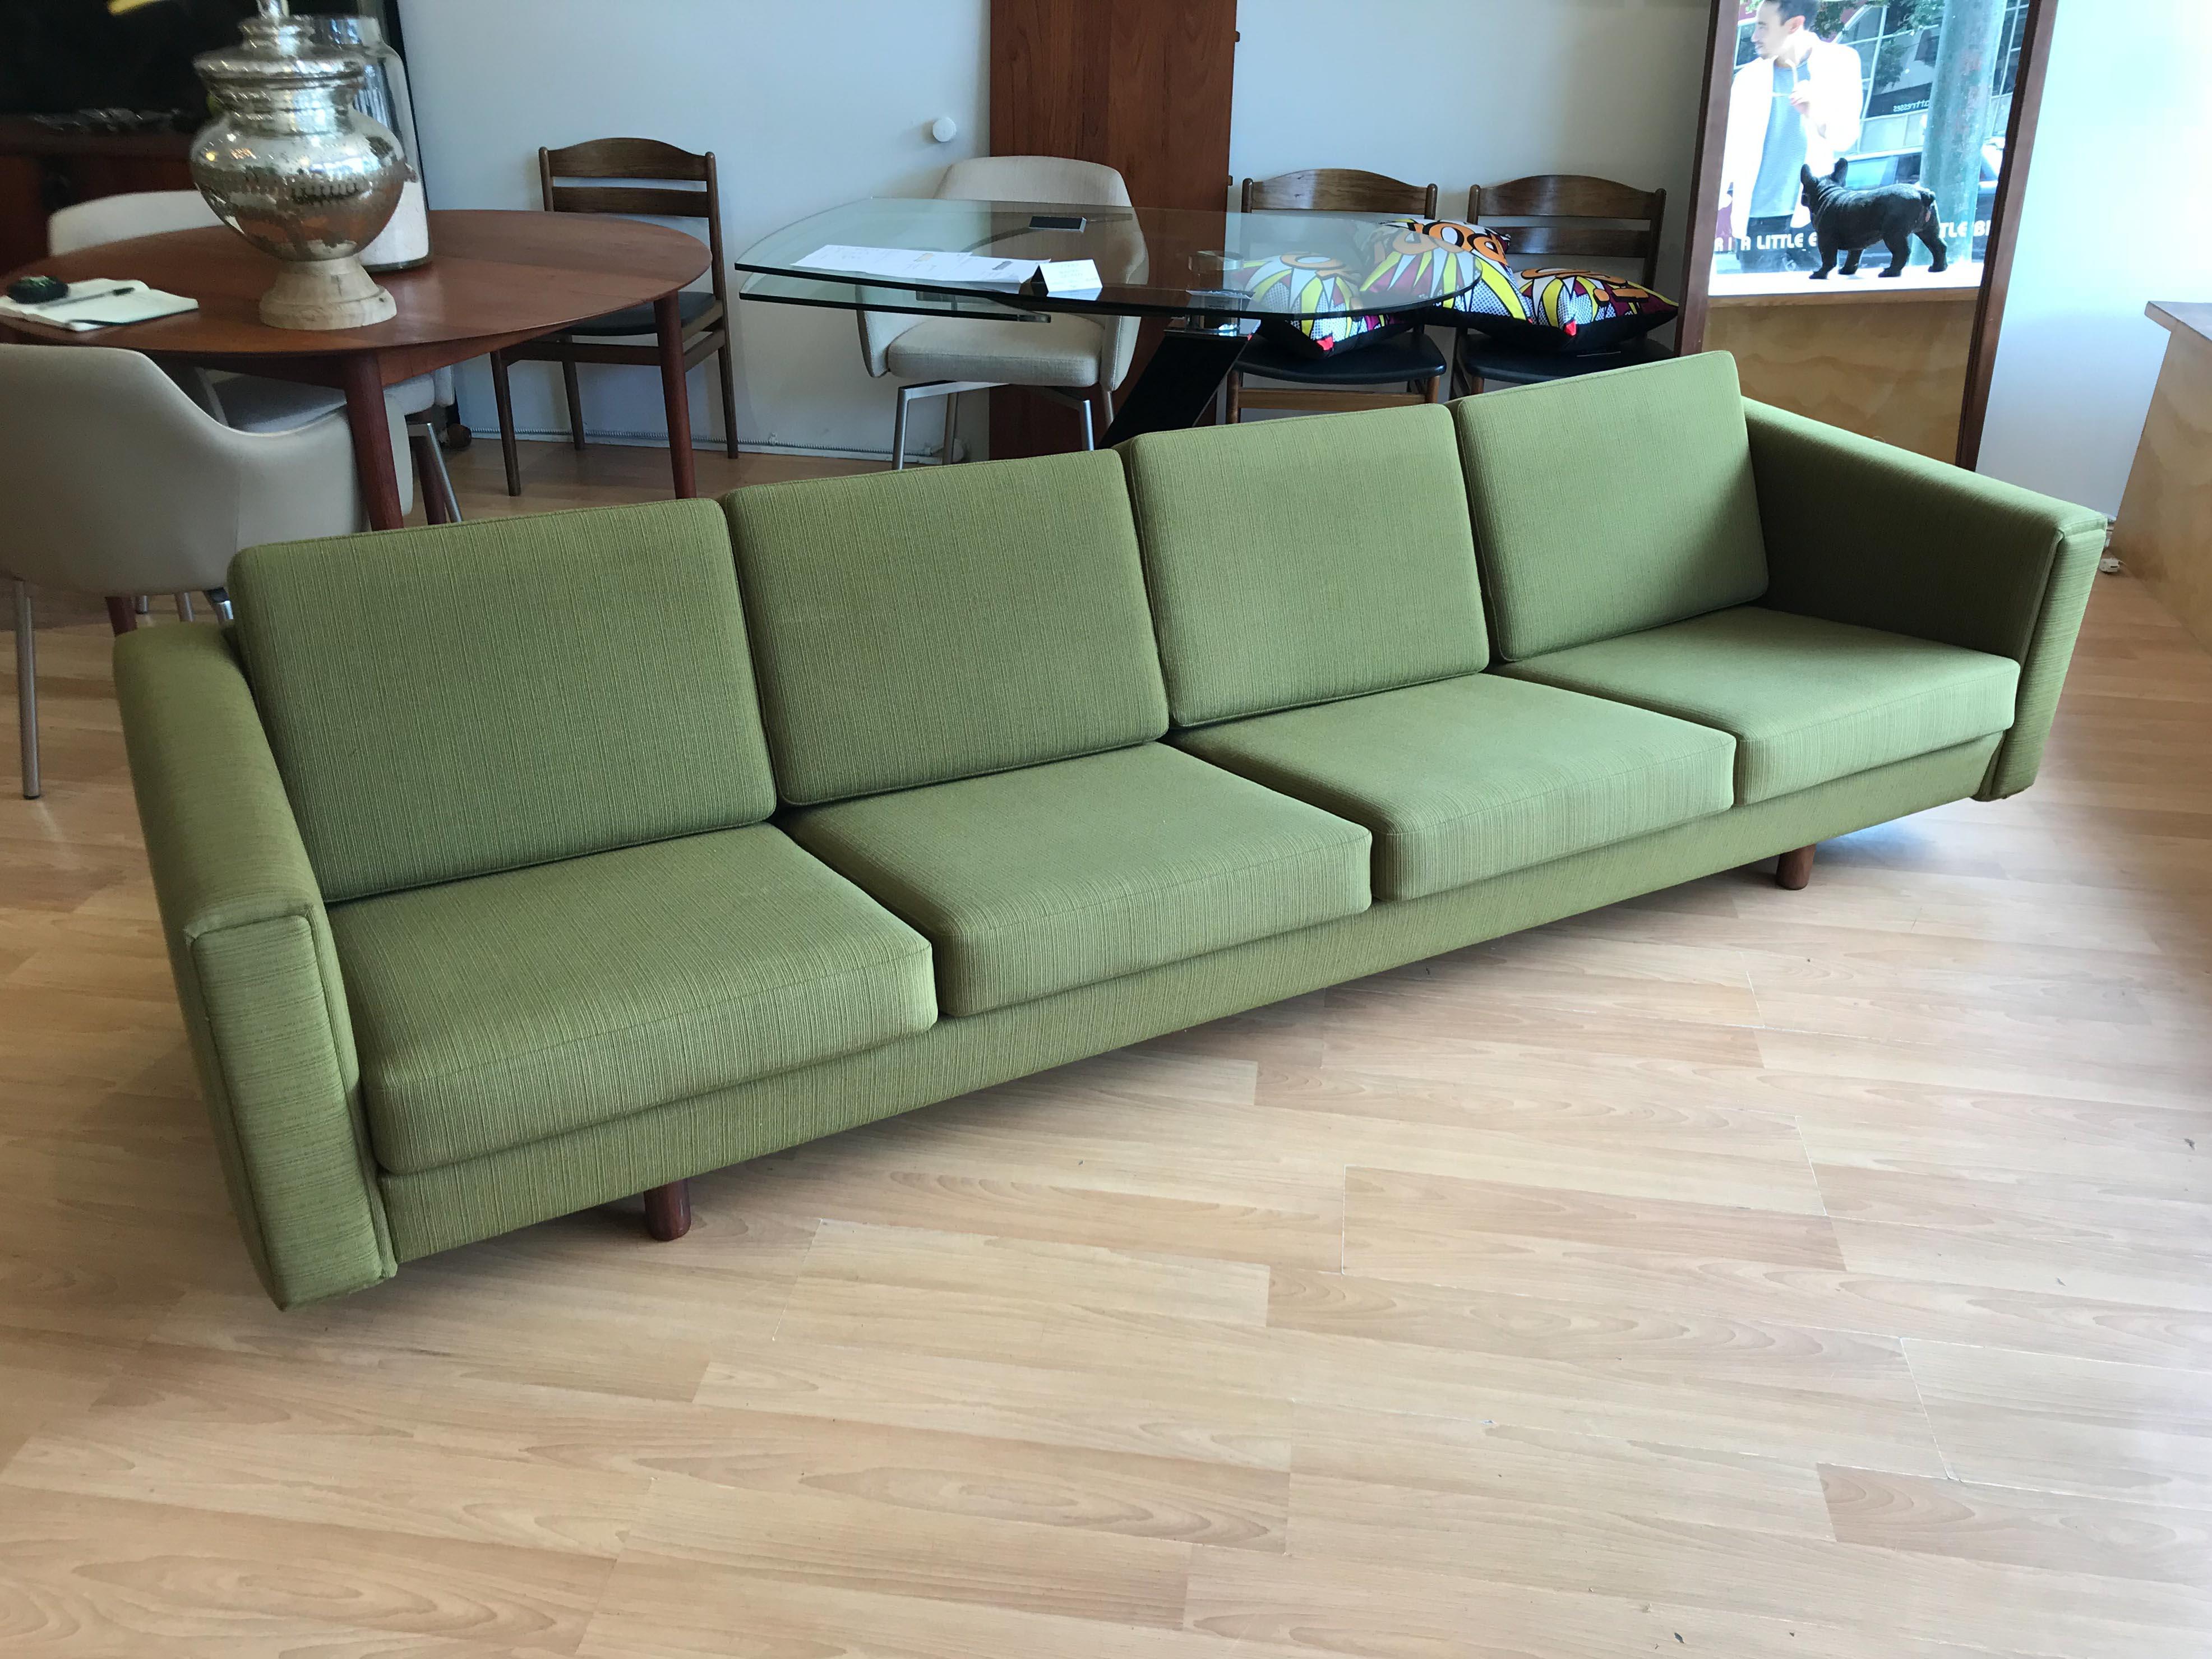 Rare model GE-300 four-seat sofa by Hans J. Wegner of GETAMA. Early edition in excellent original condition with what is thought to be it's original upholstery. Walnut legs, innerspring cushions and solid wood frame, a beautiful example of the model.